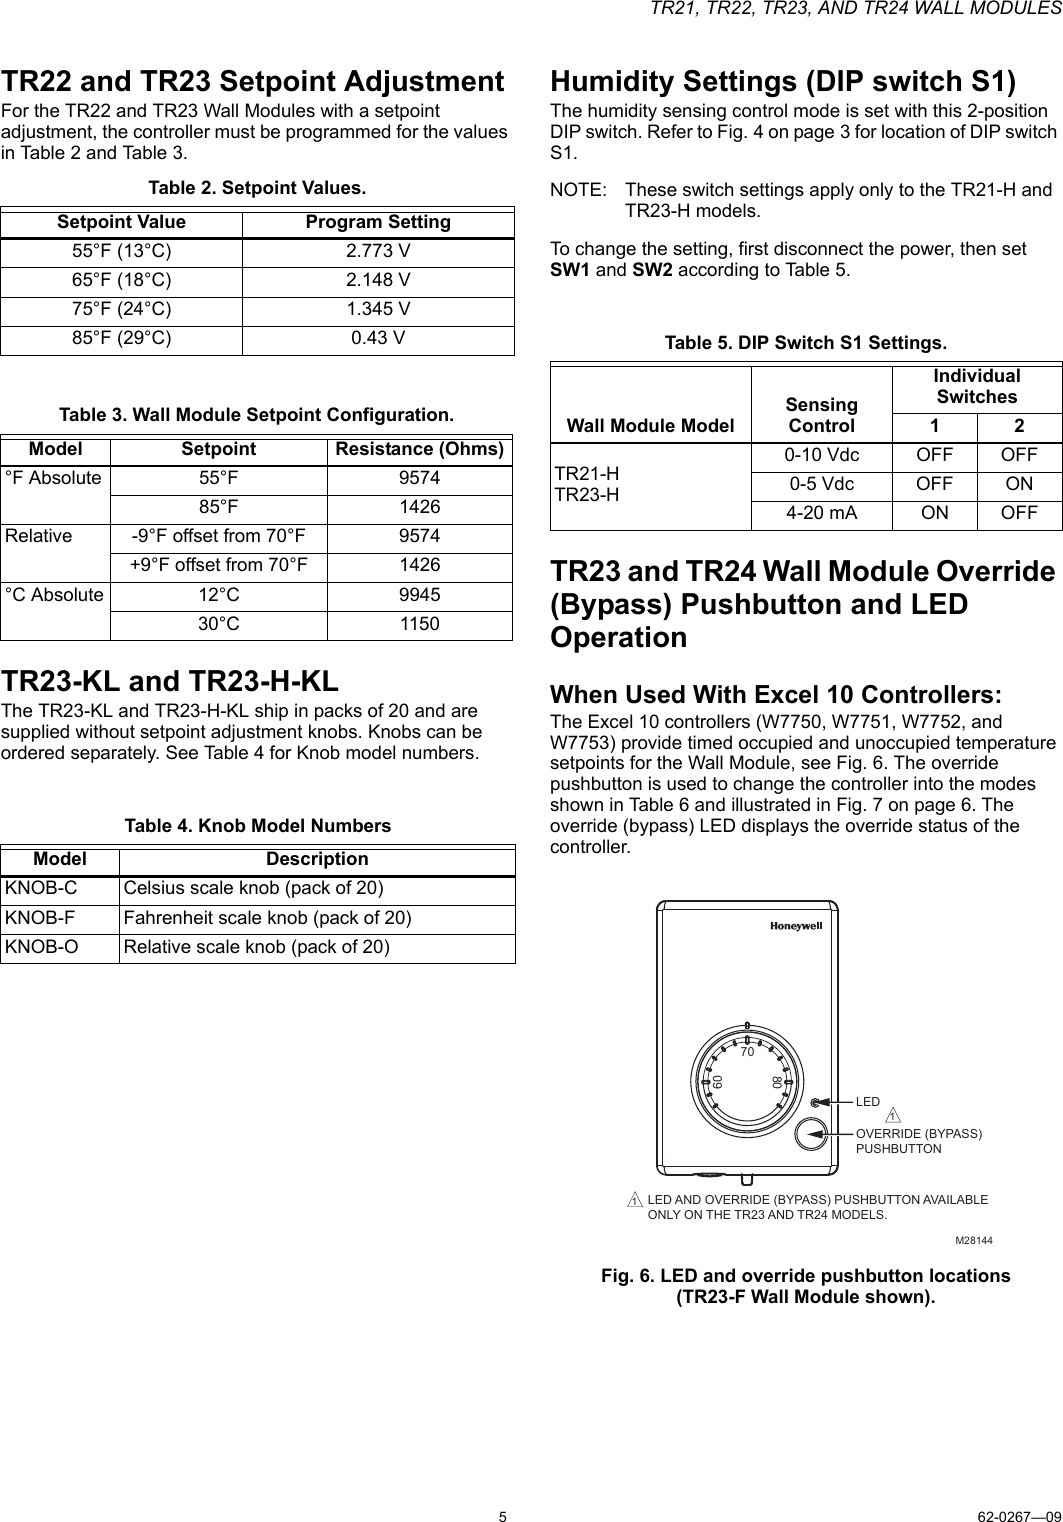 Page 5 of 8 - Honeywell Honeywell-Honeywell-Tv-Mount-Tr21-Users-Manual- 62-0267_E TR21, TR22, TR23, And TR24 Wall Modules  Honeywell-honeywell-tv-mount-tr21-users-manual